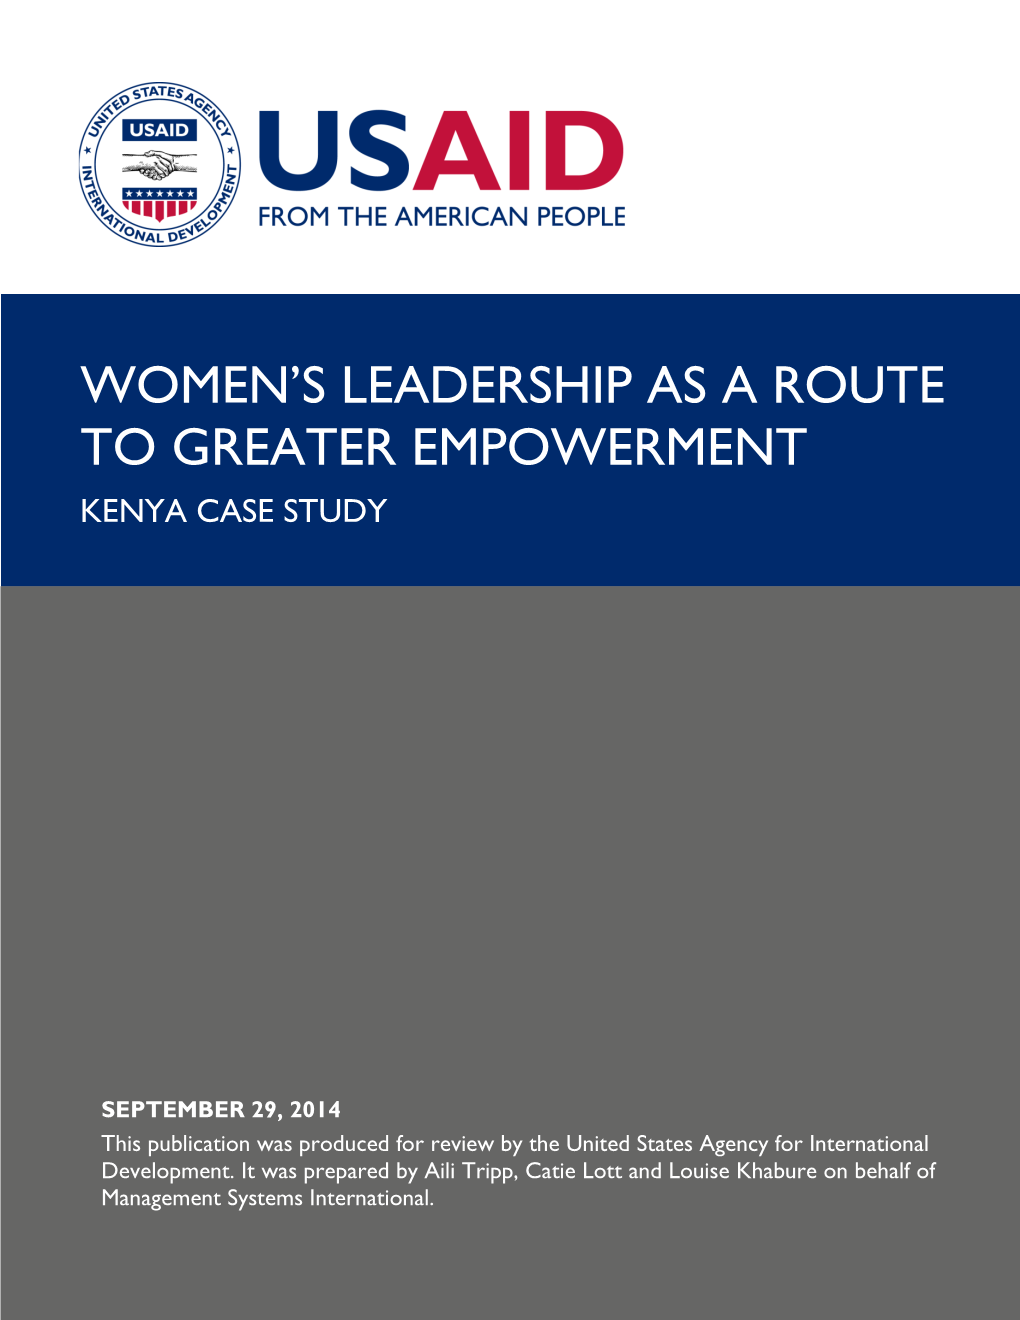 Women's Leadership As a Route to Greater Empowerment